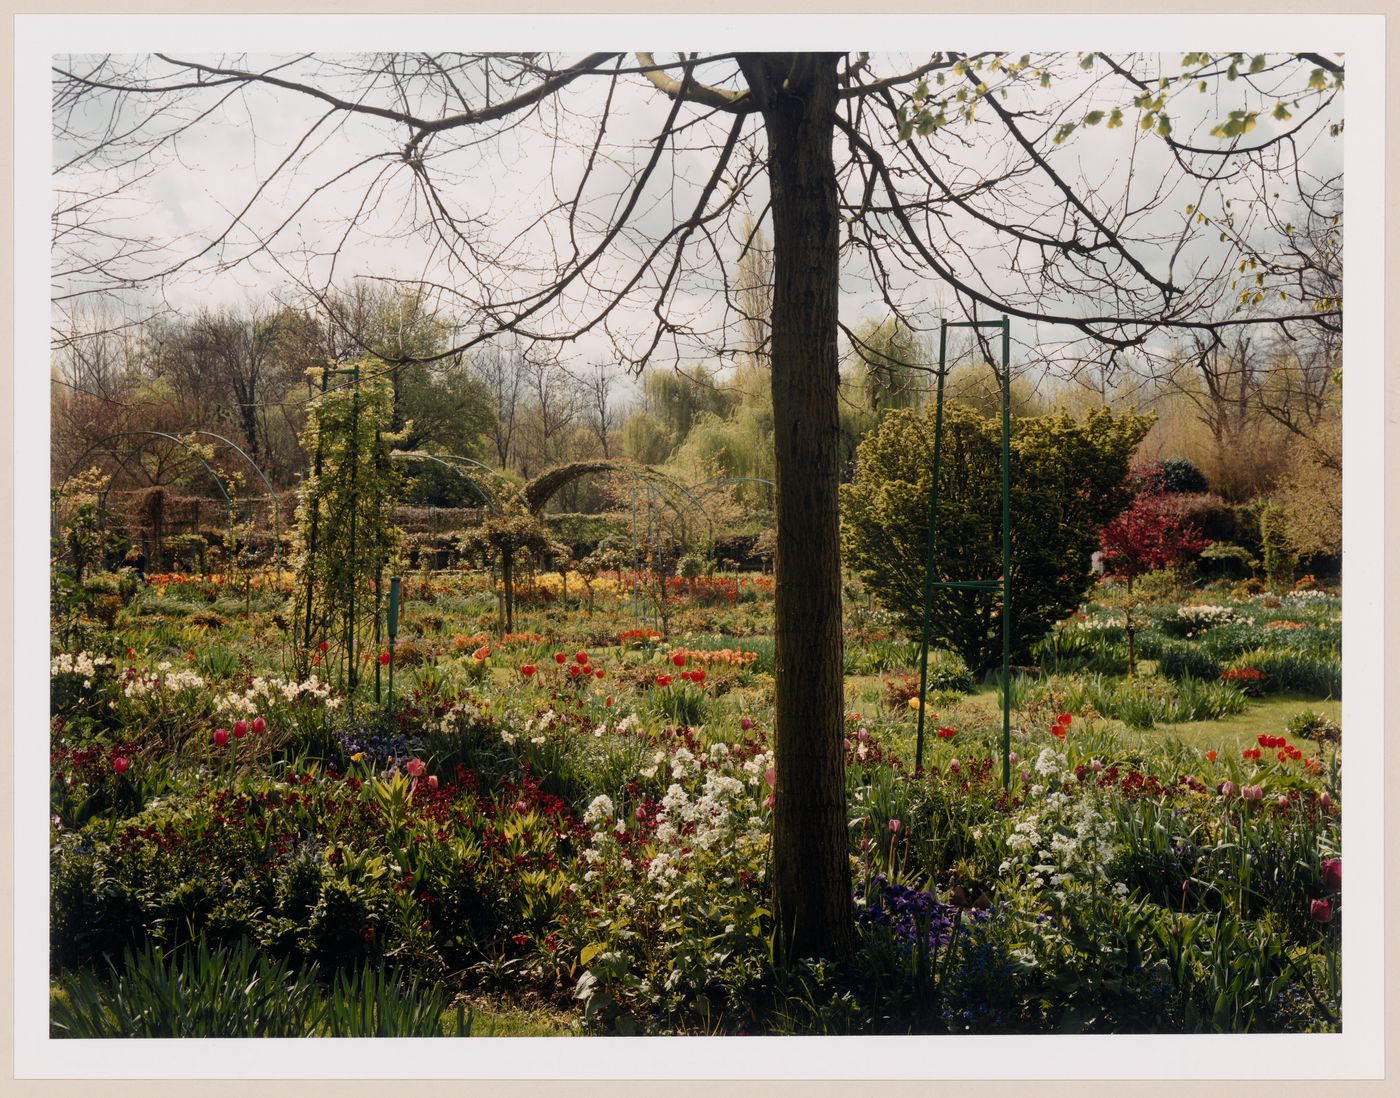 The enclosed Norman garden in the Spring, Monet Gardens, Giverny, France